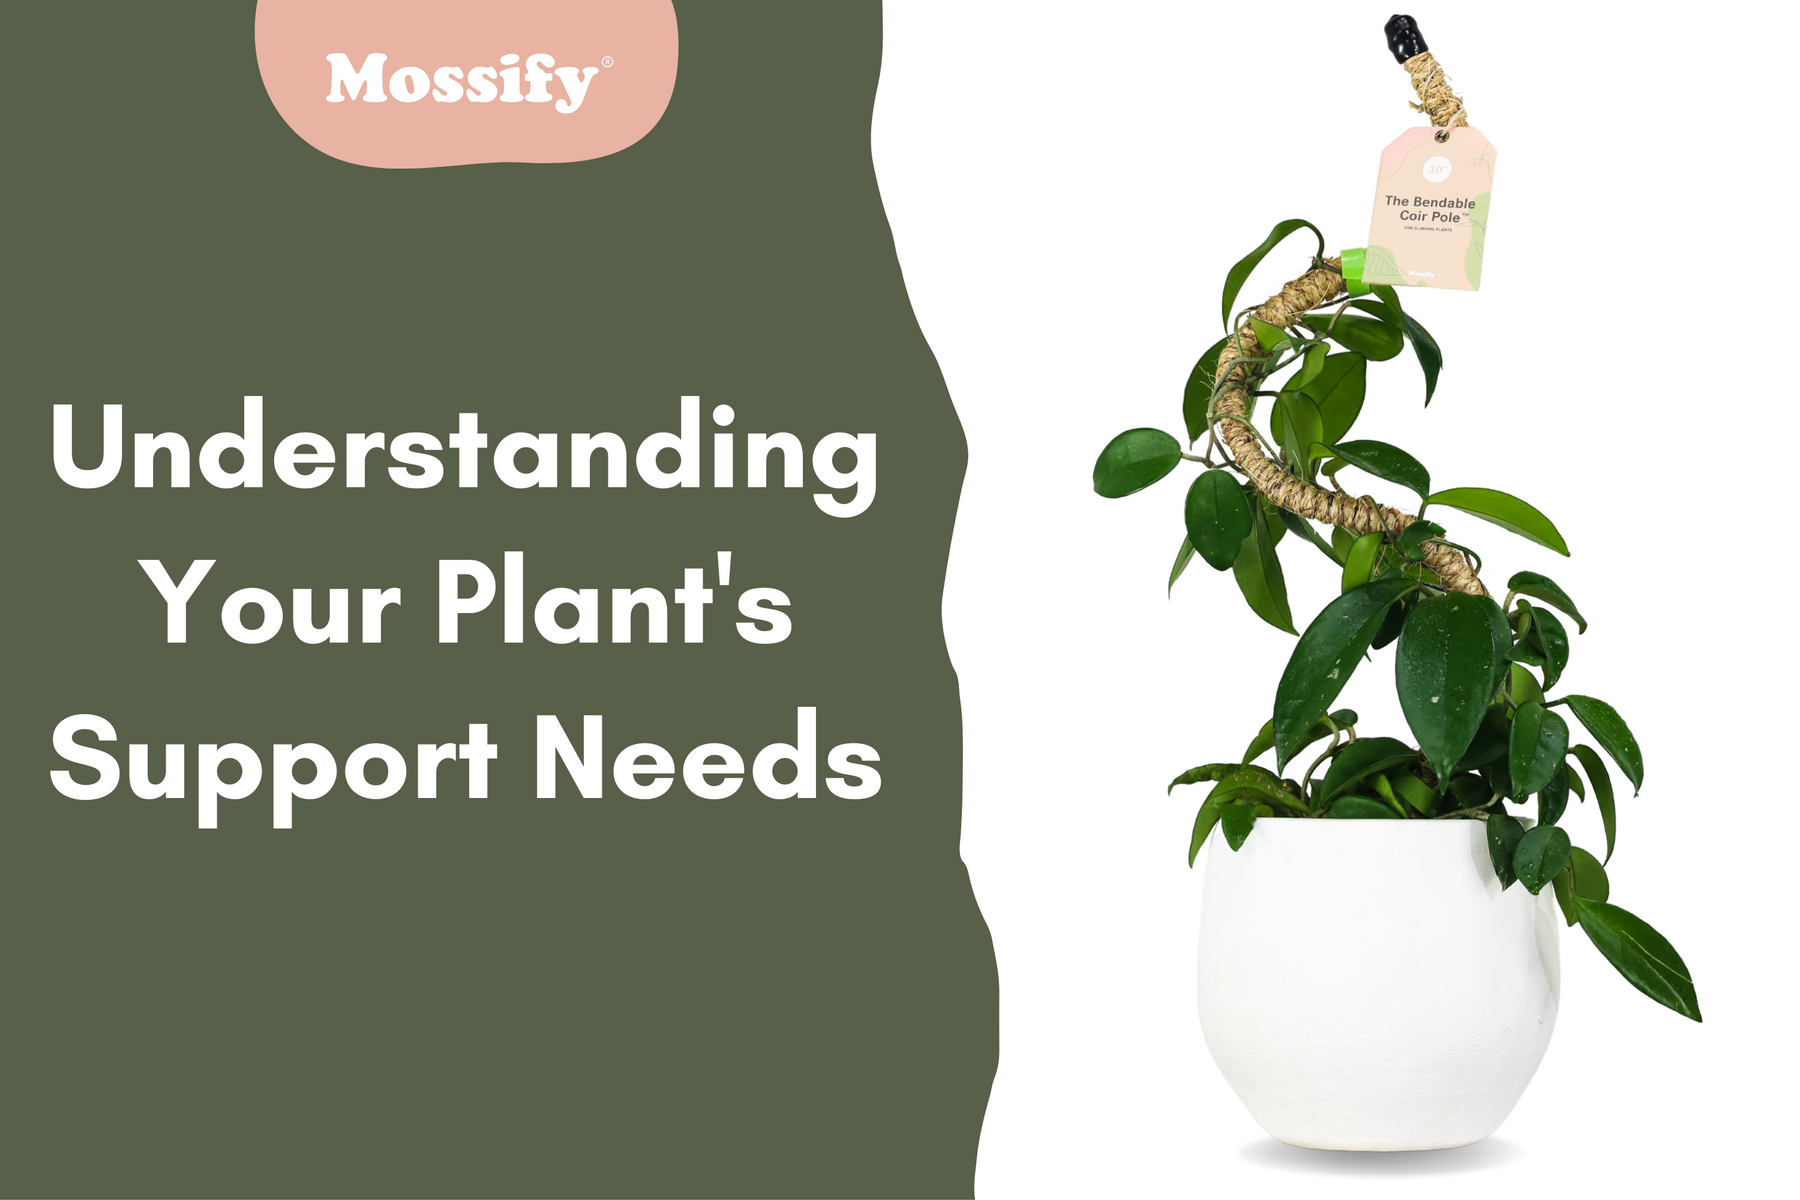 Understanding Your Plant's Support Needs: Coir Poles, Moss Poles, Trellises, and More